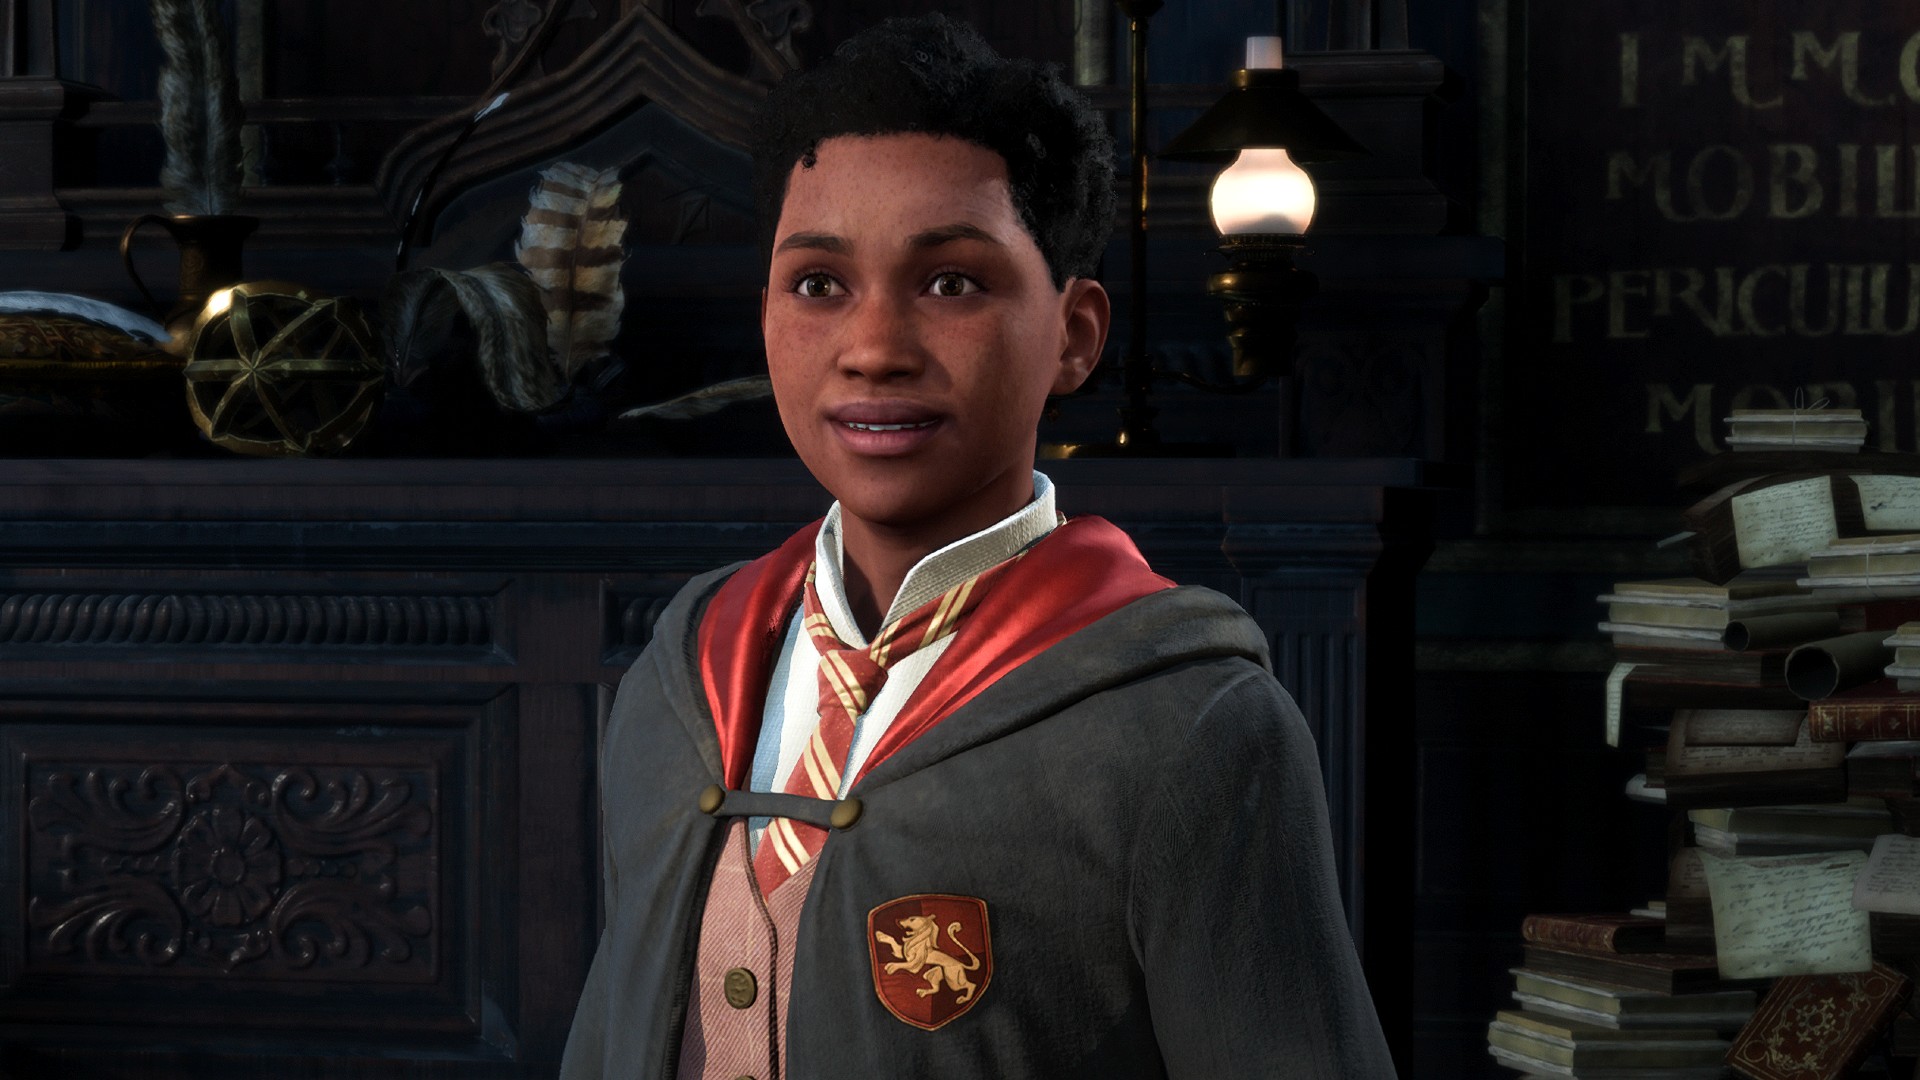 Hogwarts Legacy - Review